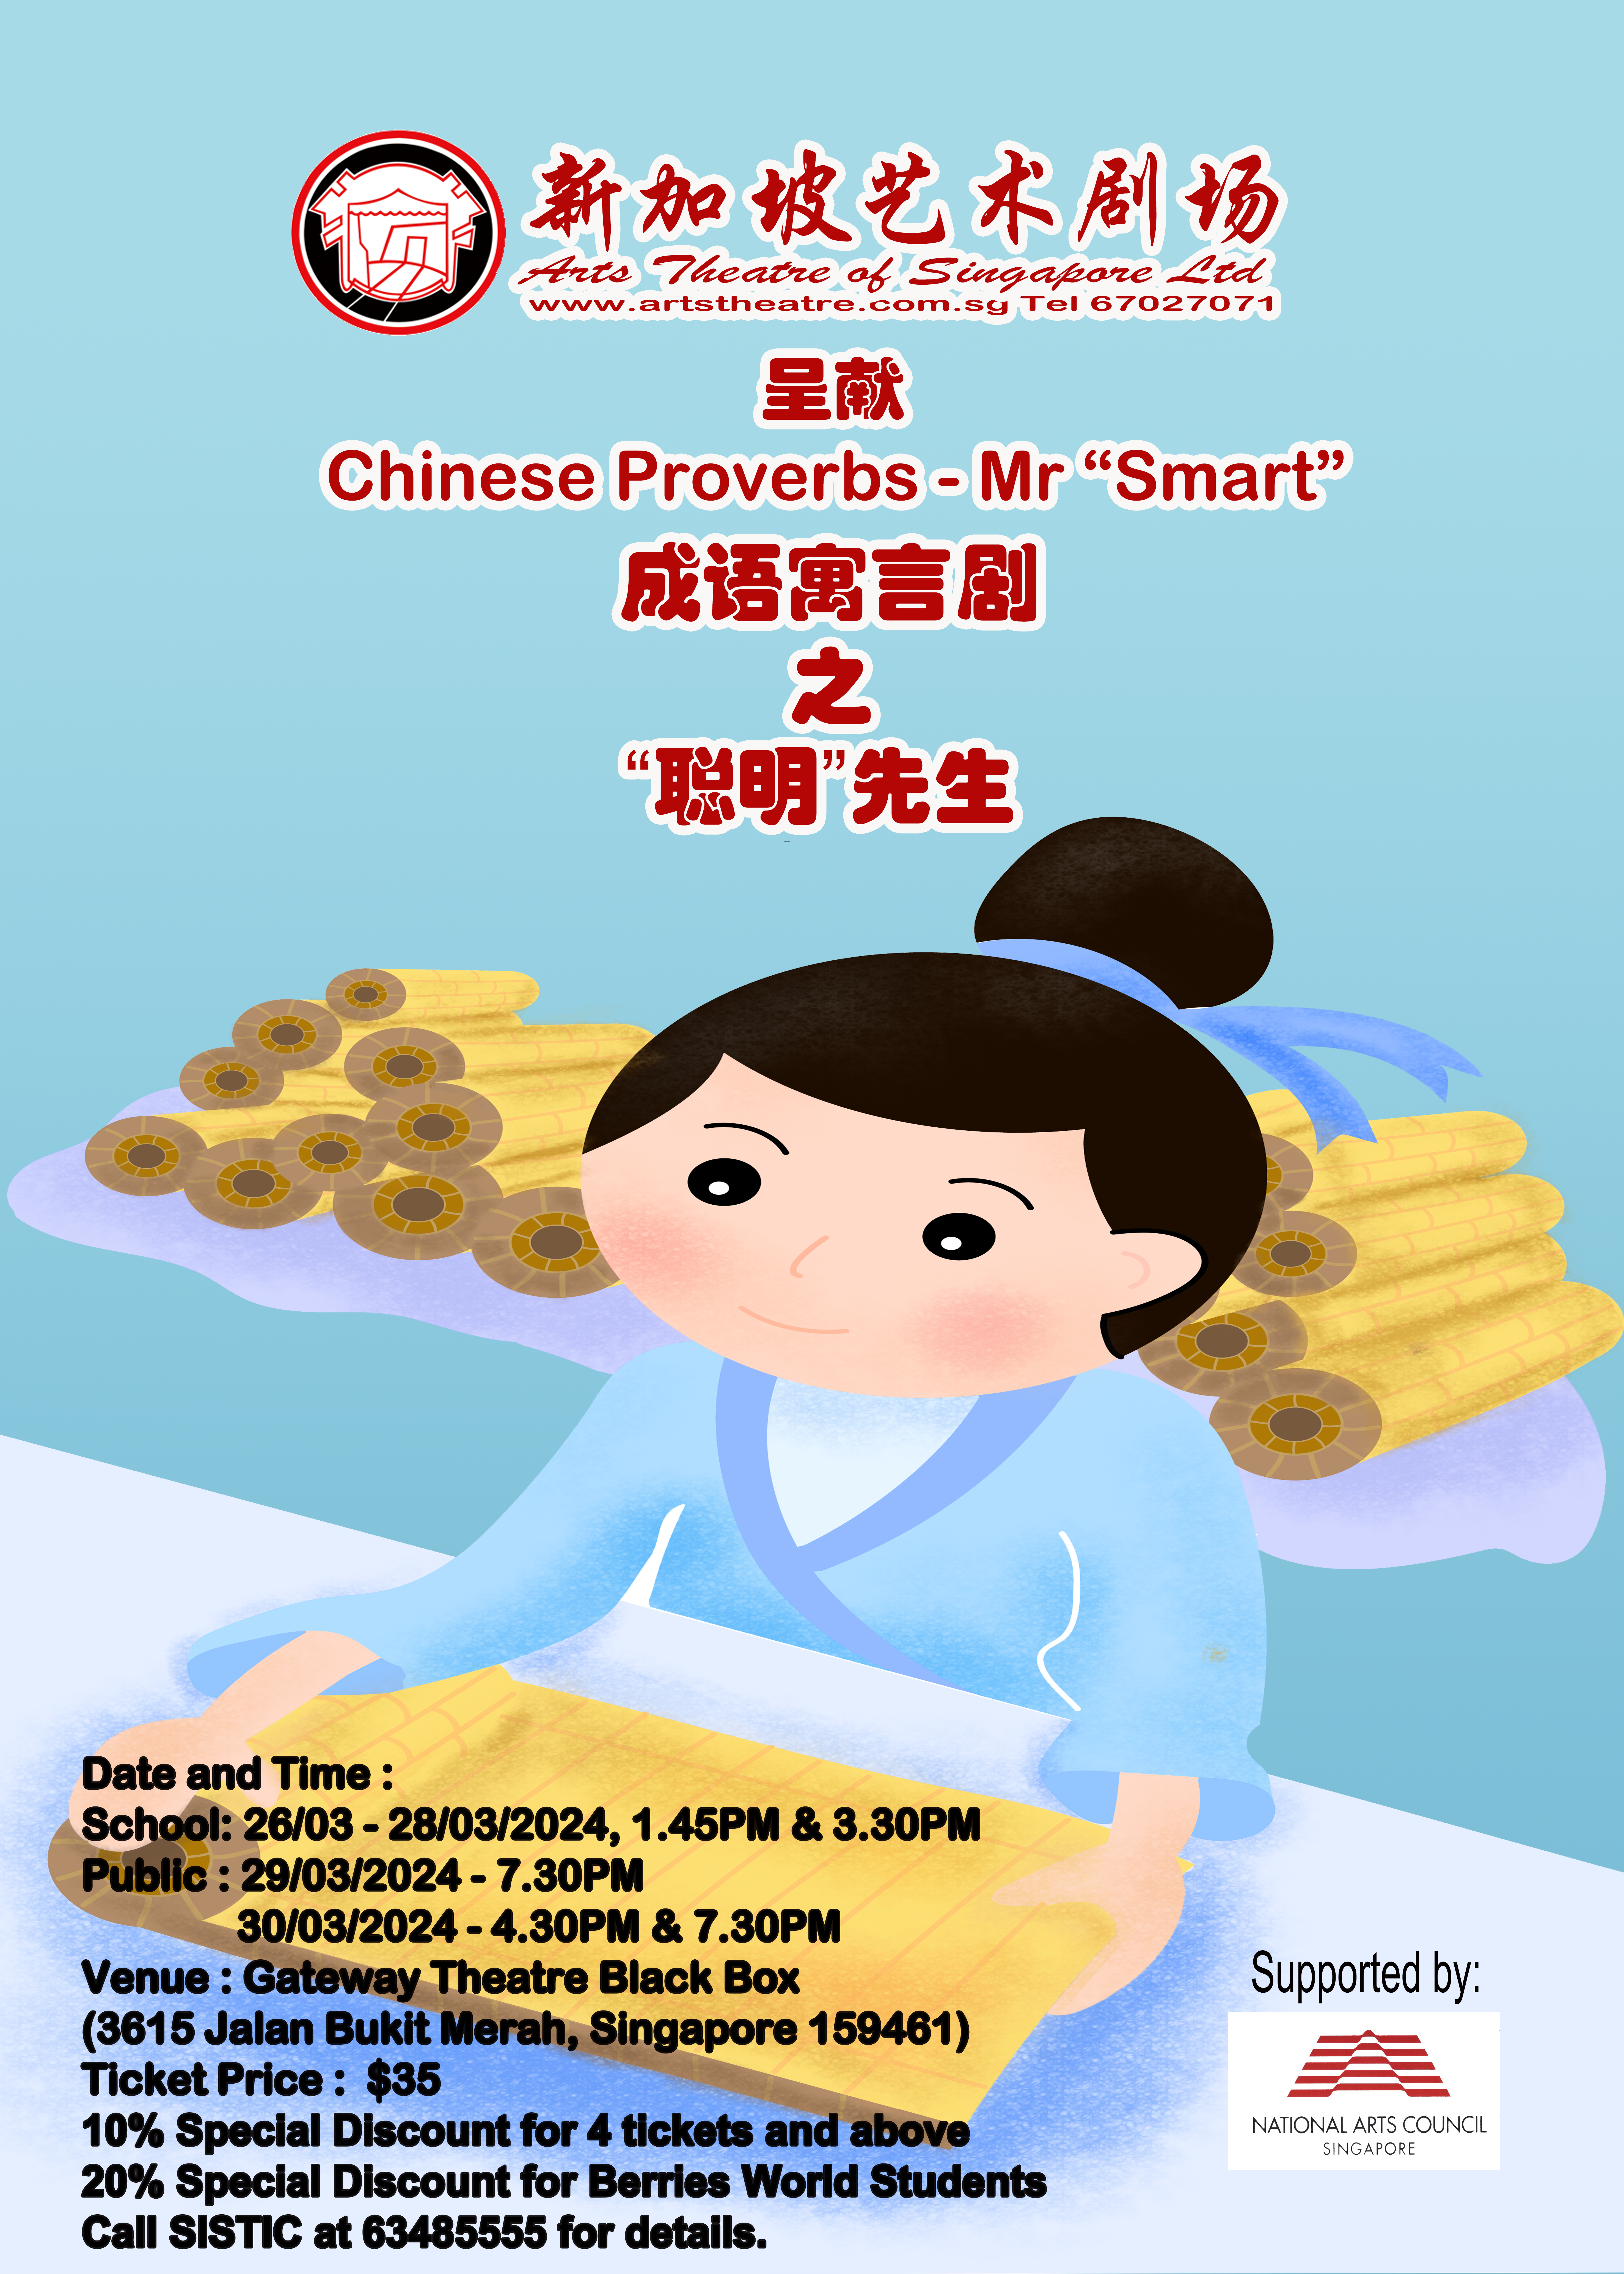 Chinese Proverbs-Mr "Smart"